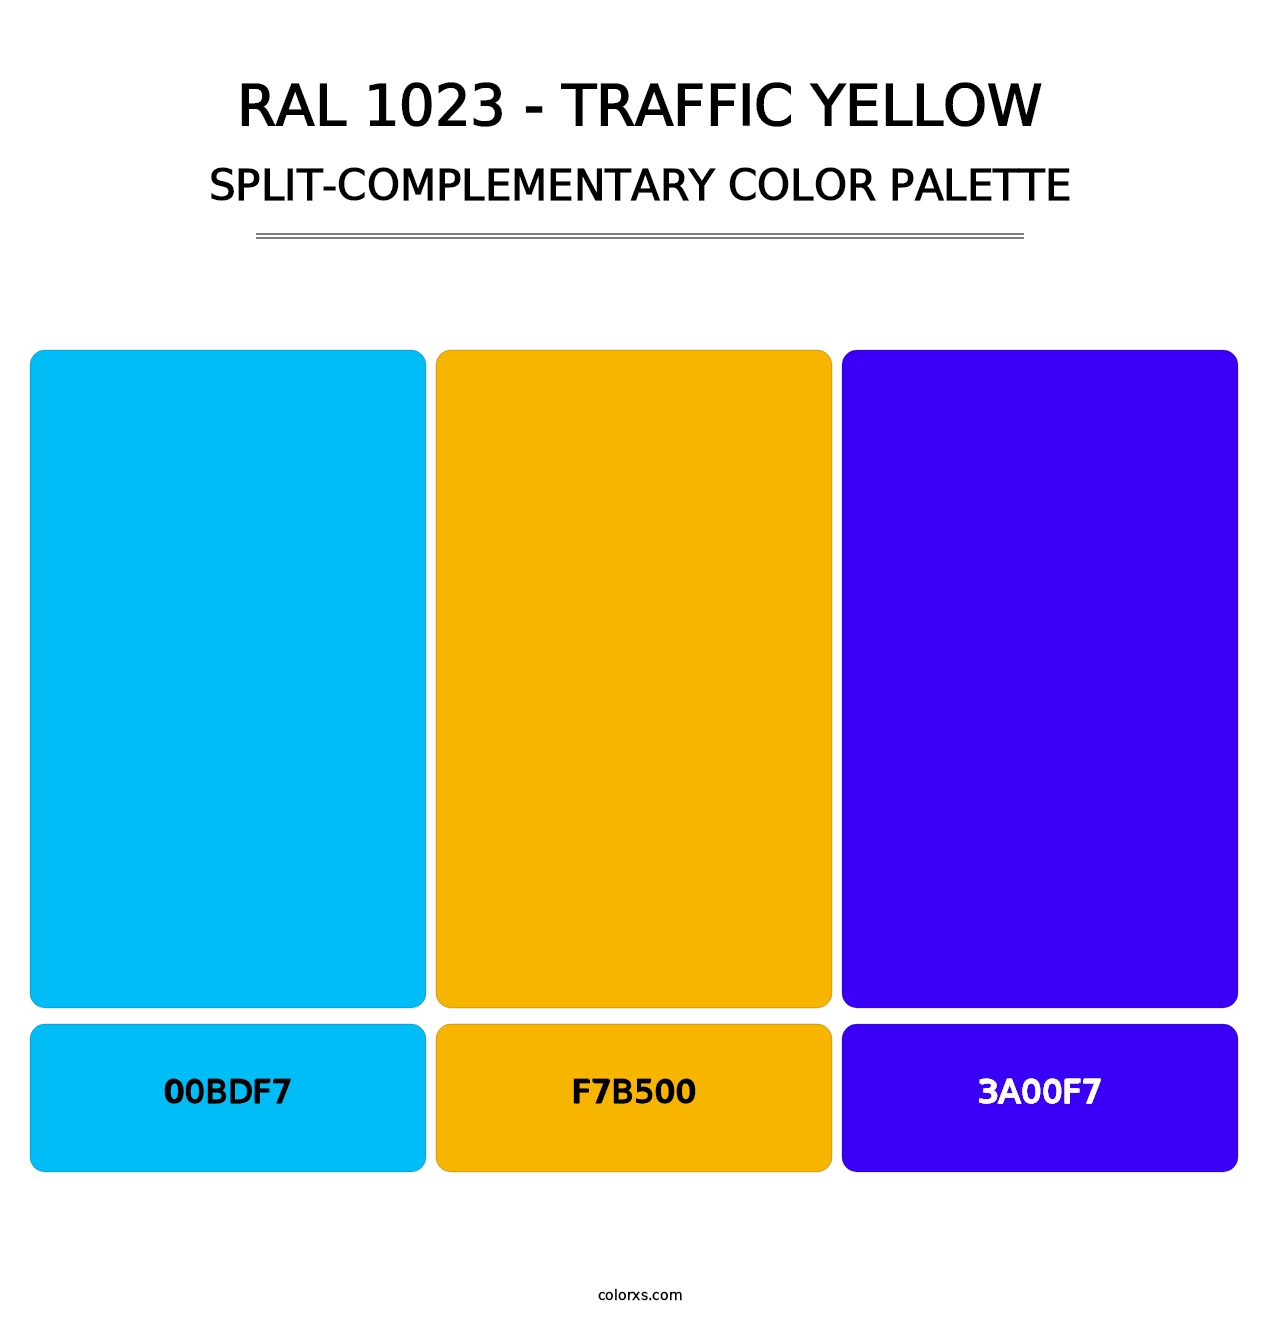 RAL 1023 - Traffic Yellow - Split-Complementary Color Palette